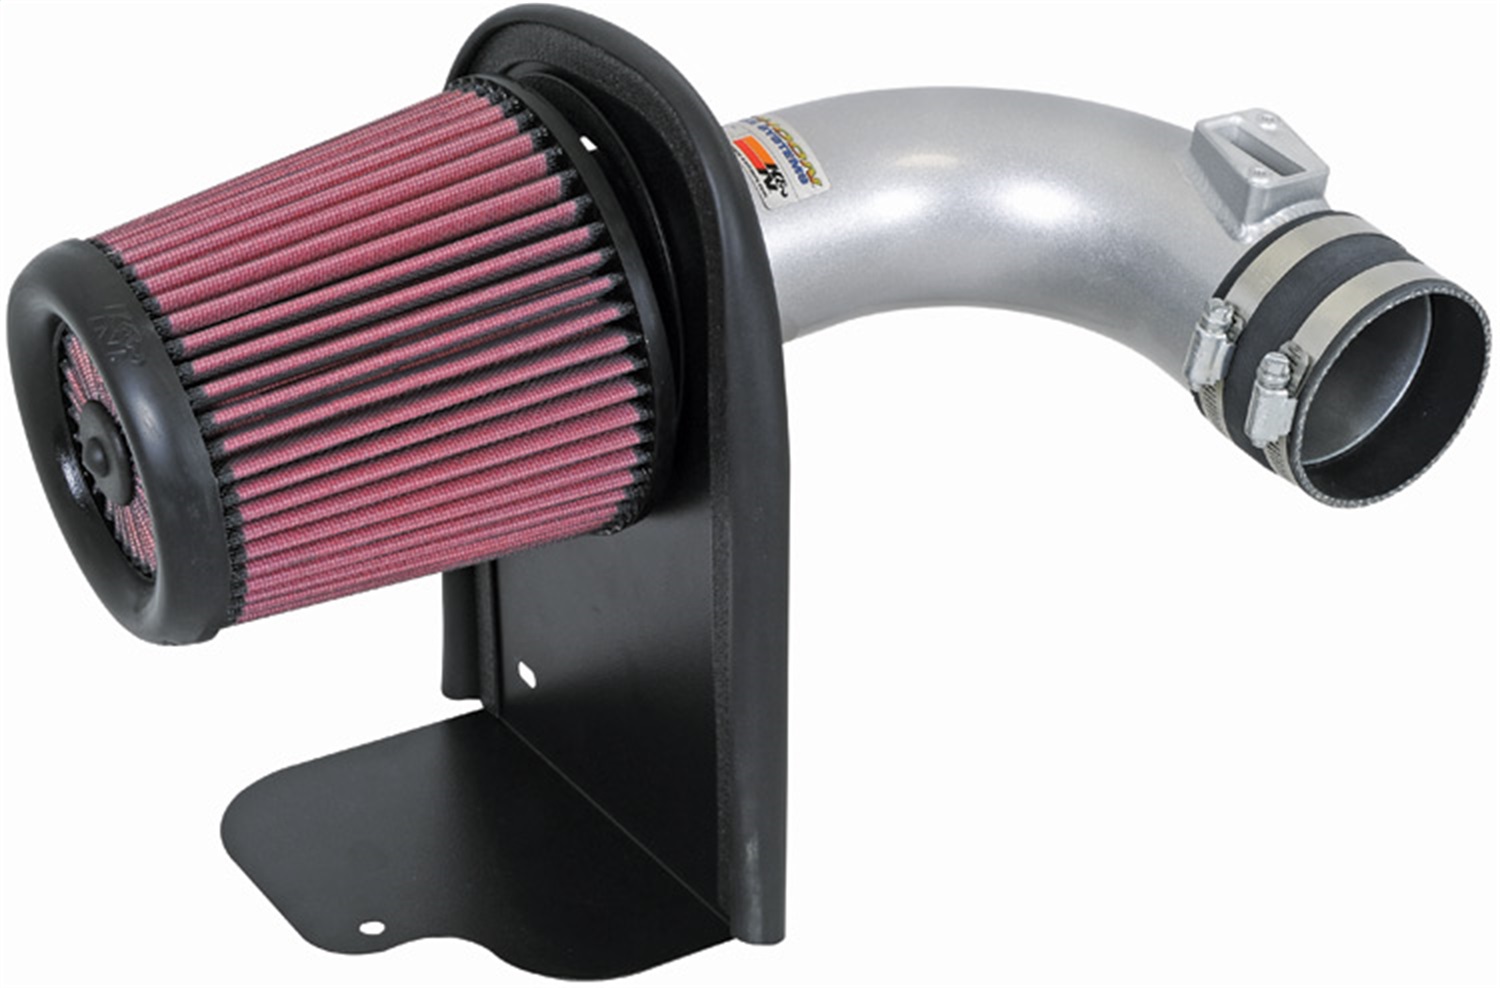 K&N Filters K&N Filters 69-0017TS Typhoon; Cold Air Intake Filter Assembly Fits 07-11 RDX